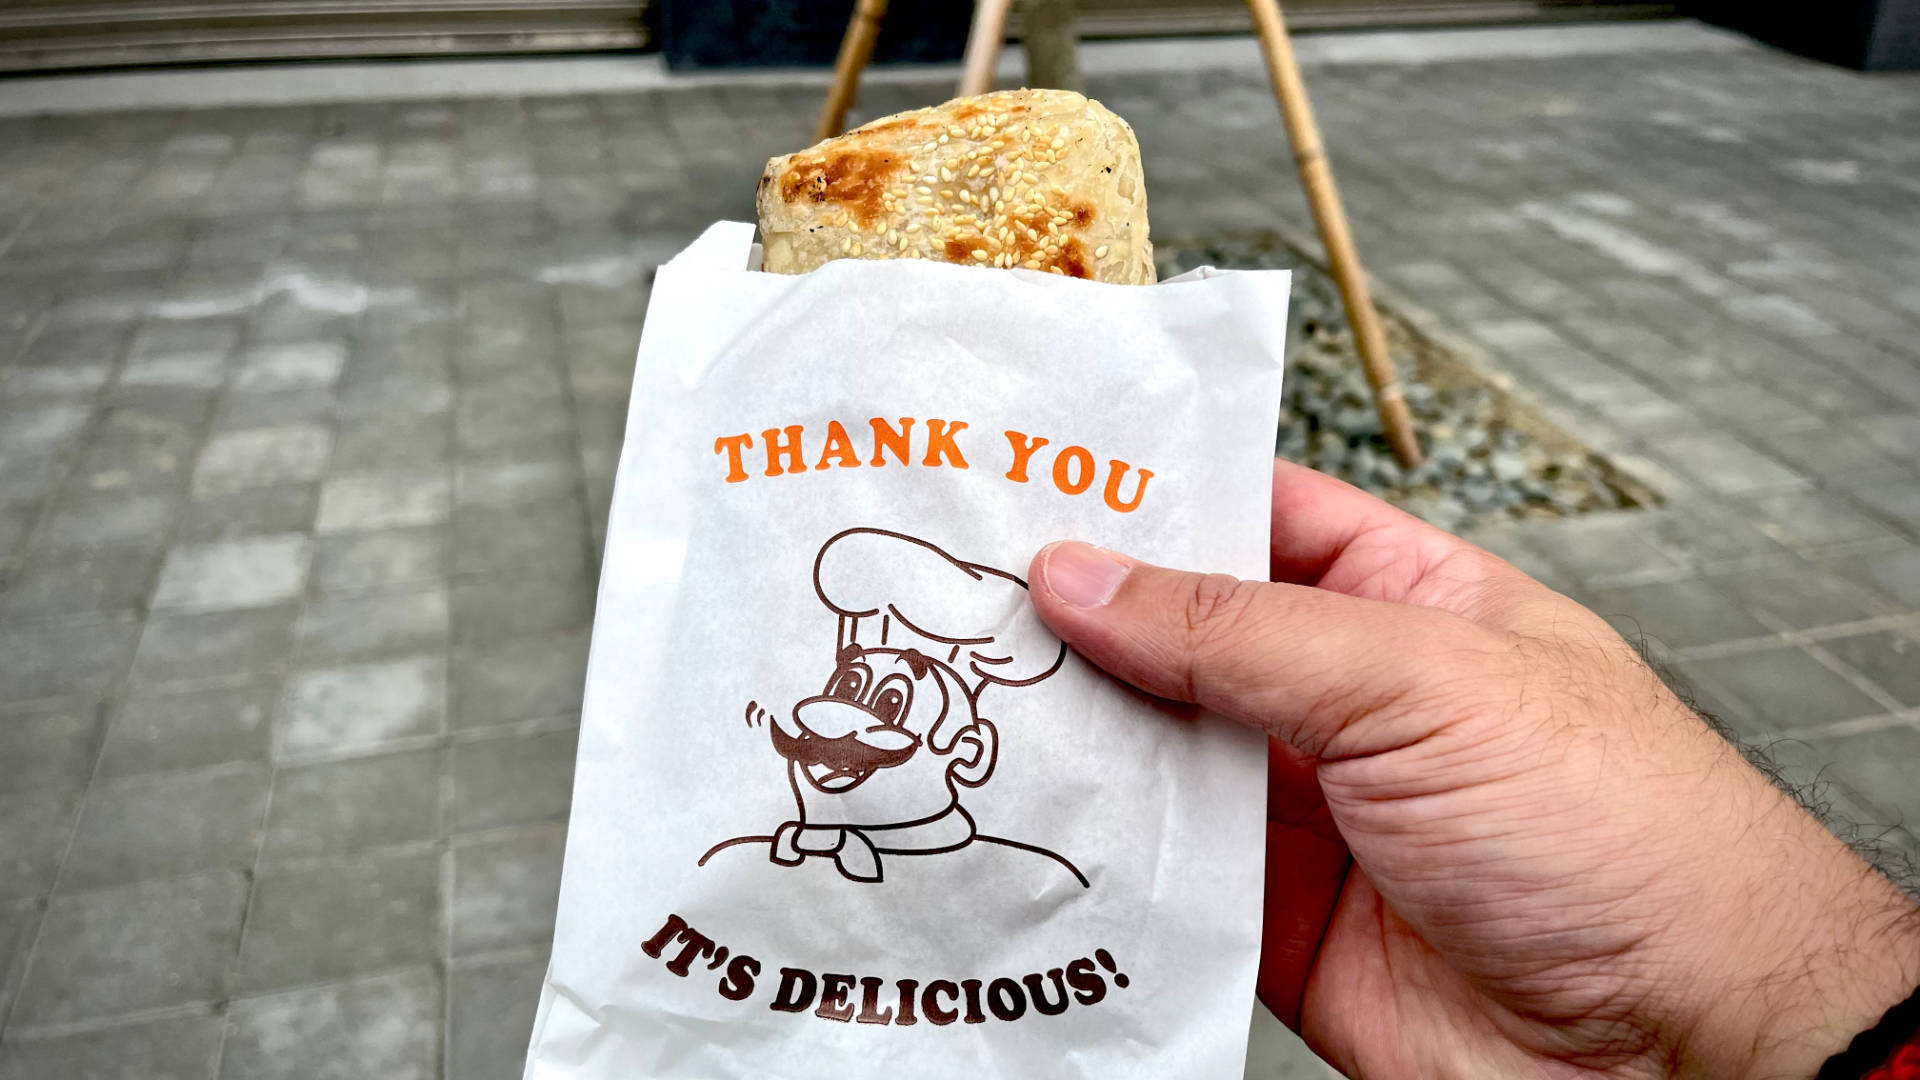 An outstretched hand holding a paper bag labelled “thank you, it’s delicious”. A pastry snack is protruding from the bag.